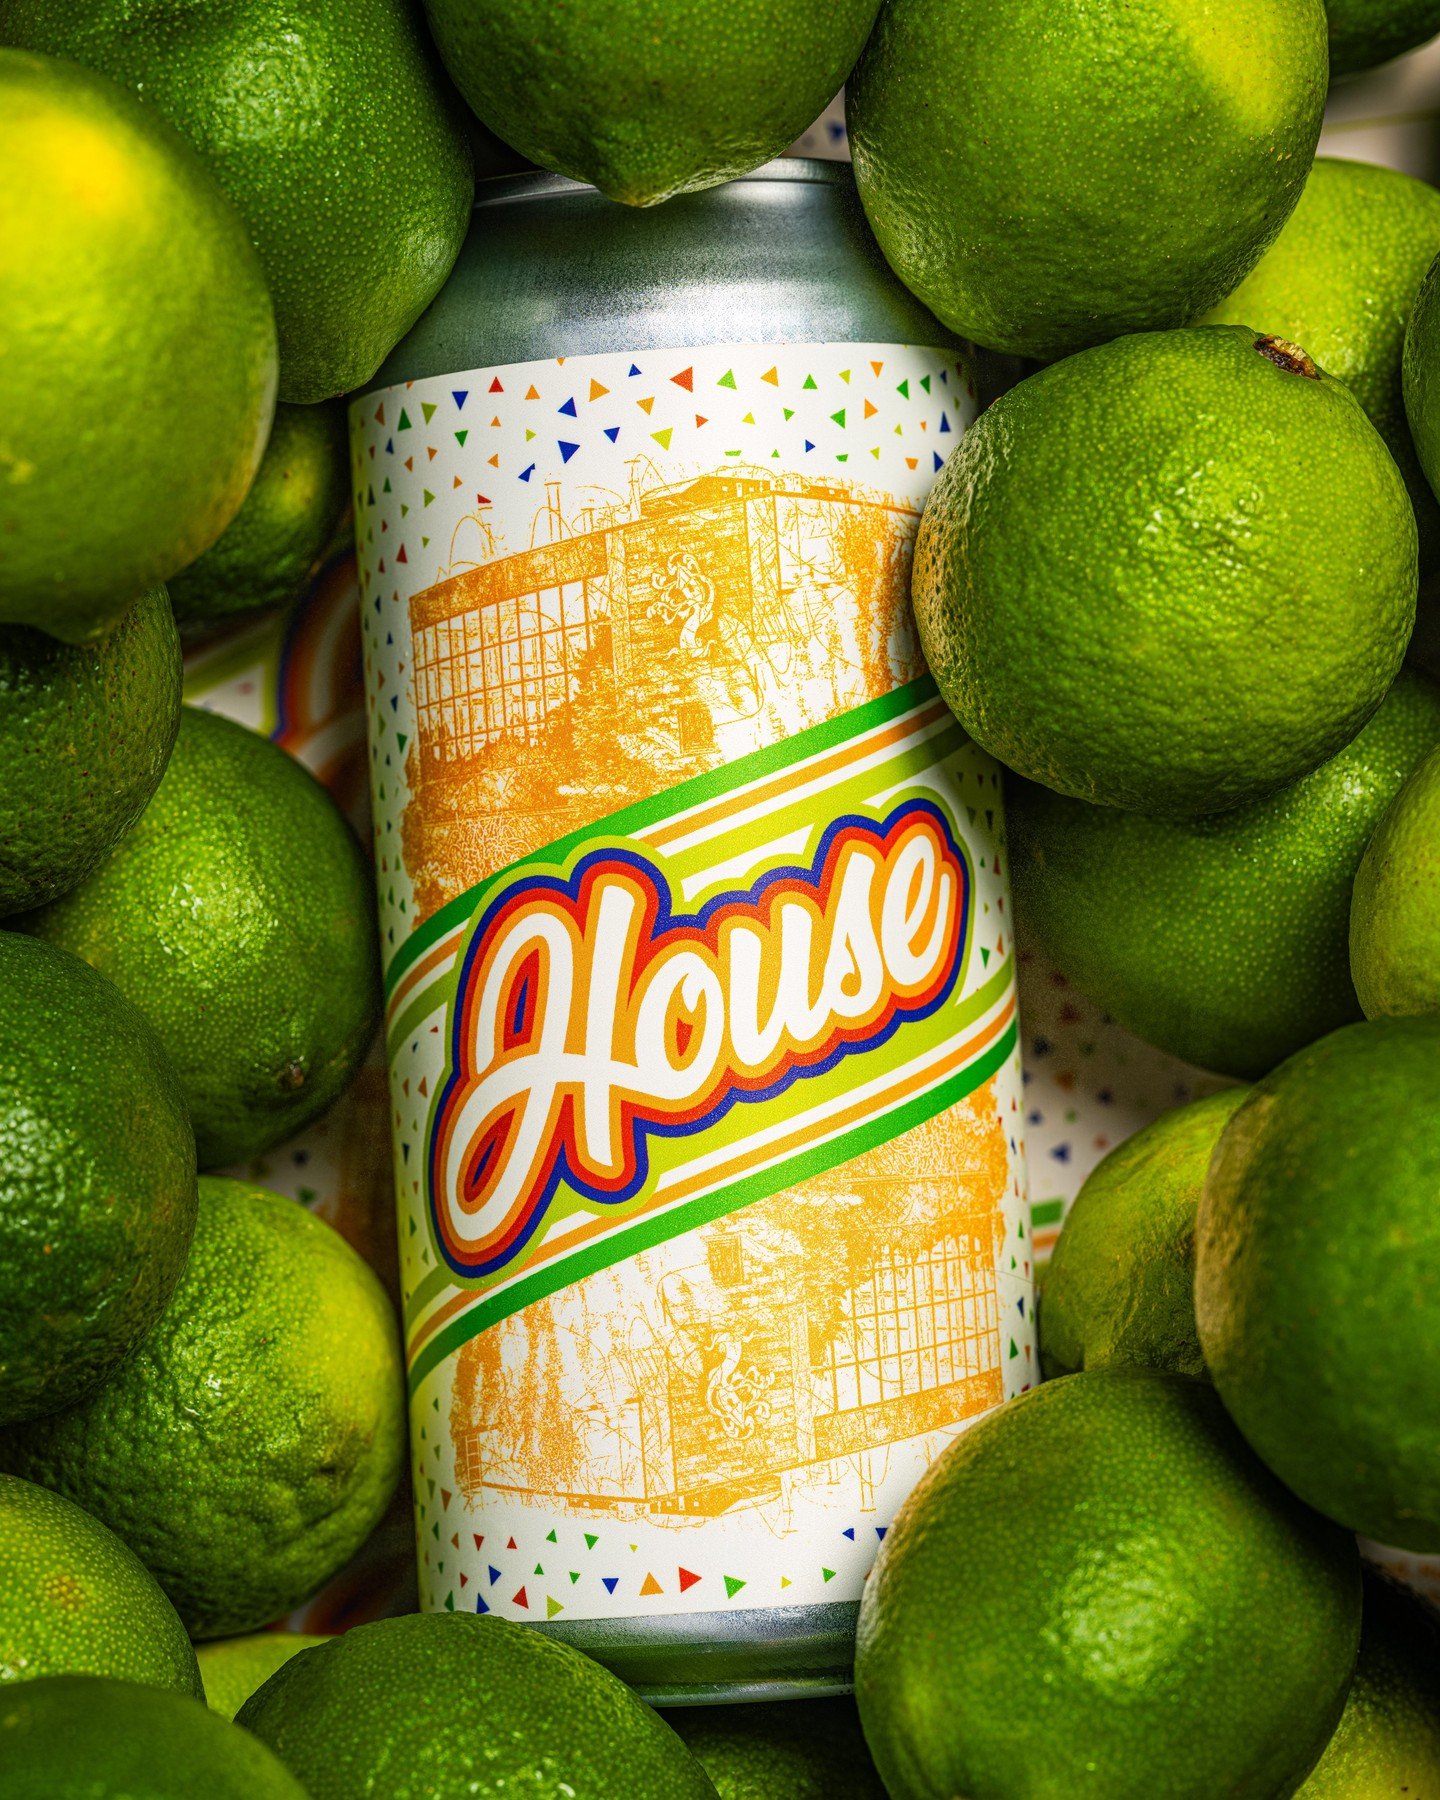 The day has come for House Lager Lime!

❤️💛💚

Don't wait on this gem - made with all-natural ingredients, it bursts out of the can with a refreshing lime character to balance the delicious local malt that permeates the flavor profile.

❤️💛💚

#pro